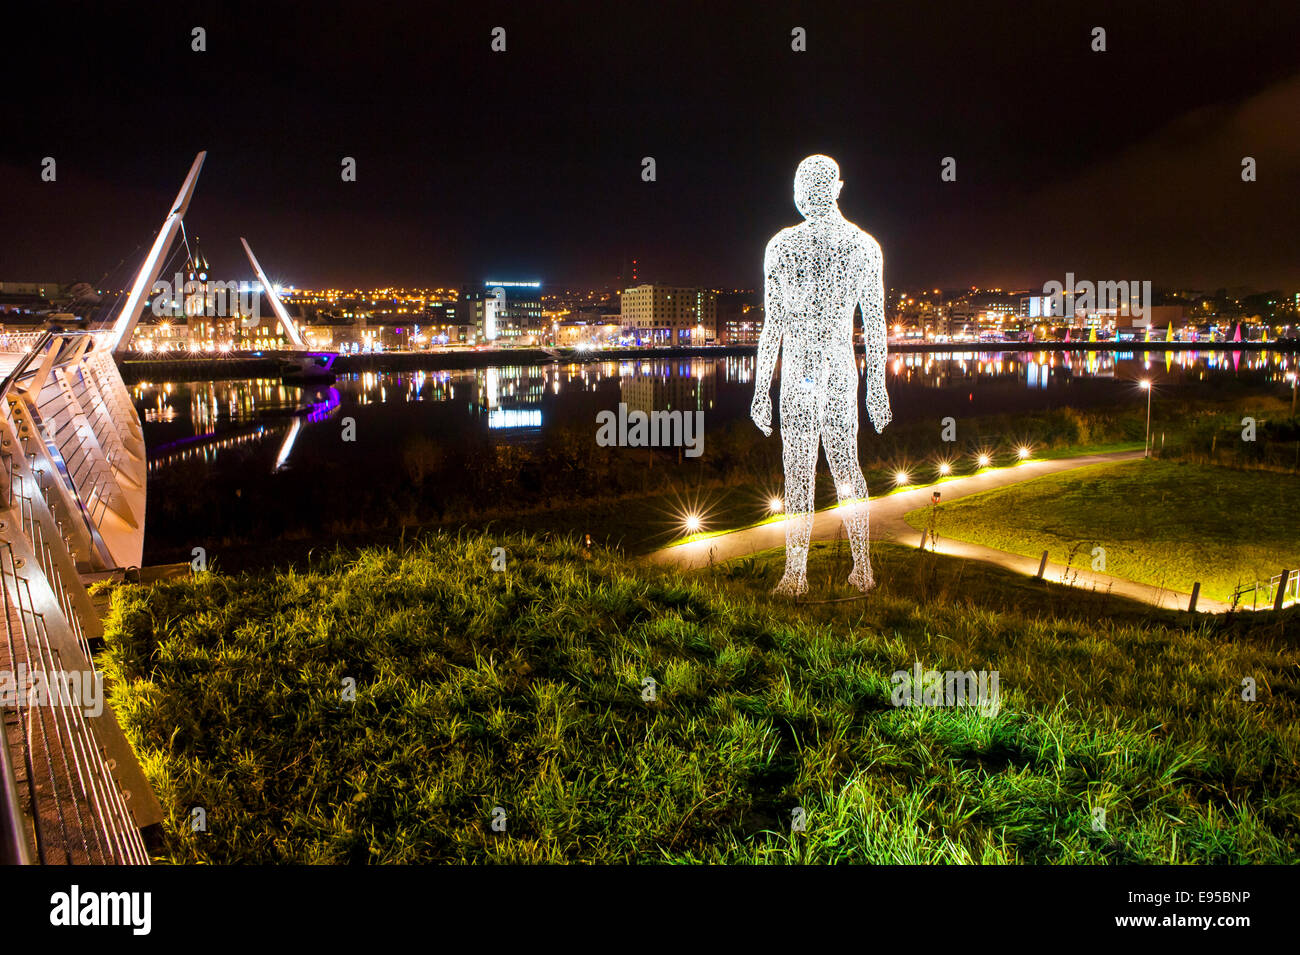 Lumiere, Derry ,Londonderry 2013, Northern Ireland, The Travellers, Cedric le Borgne, derry city, River Foyle Stock Photo